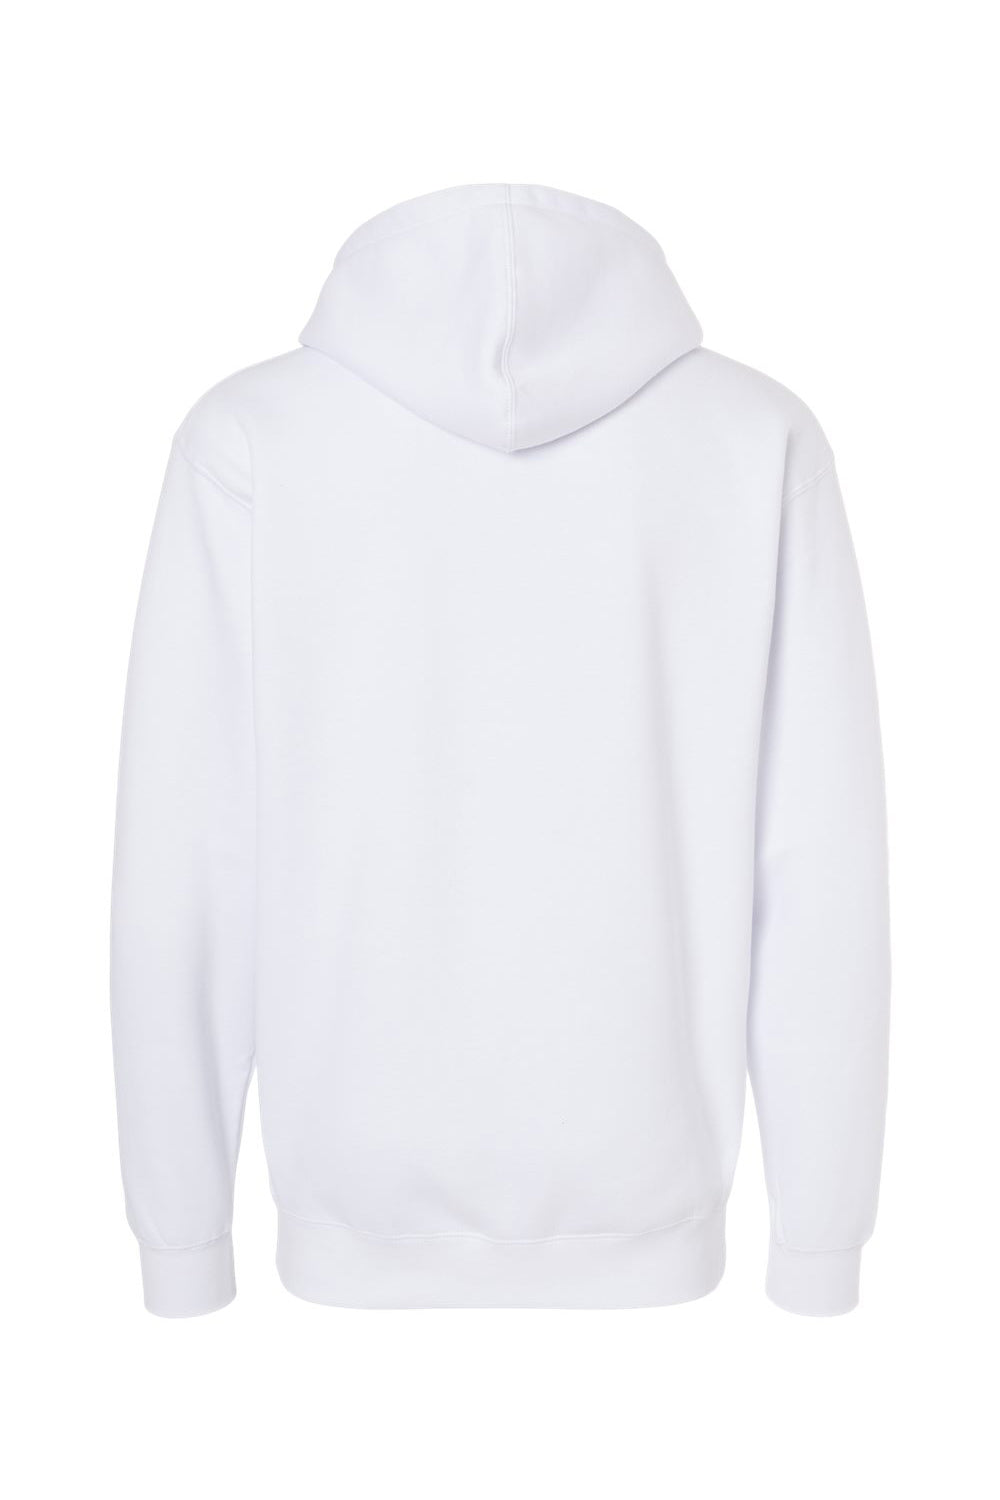 Independent Trading Co. IND4000 Mens Hooded Sweatshirt Hoodie White Flat Back